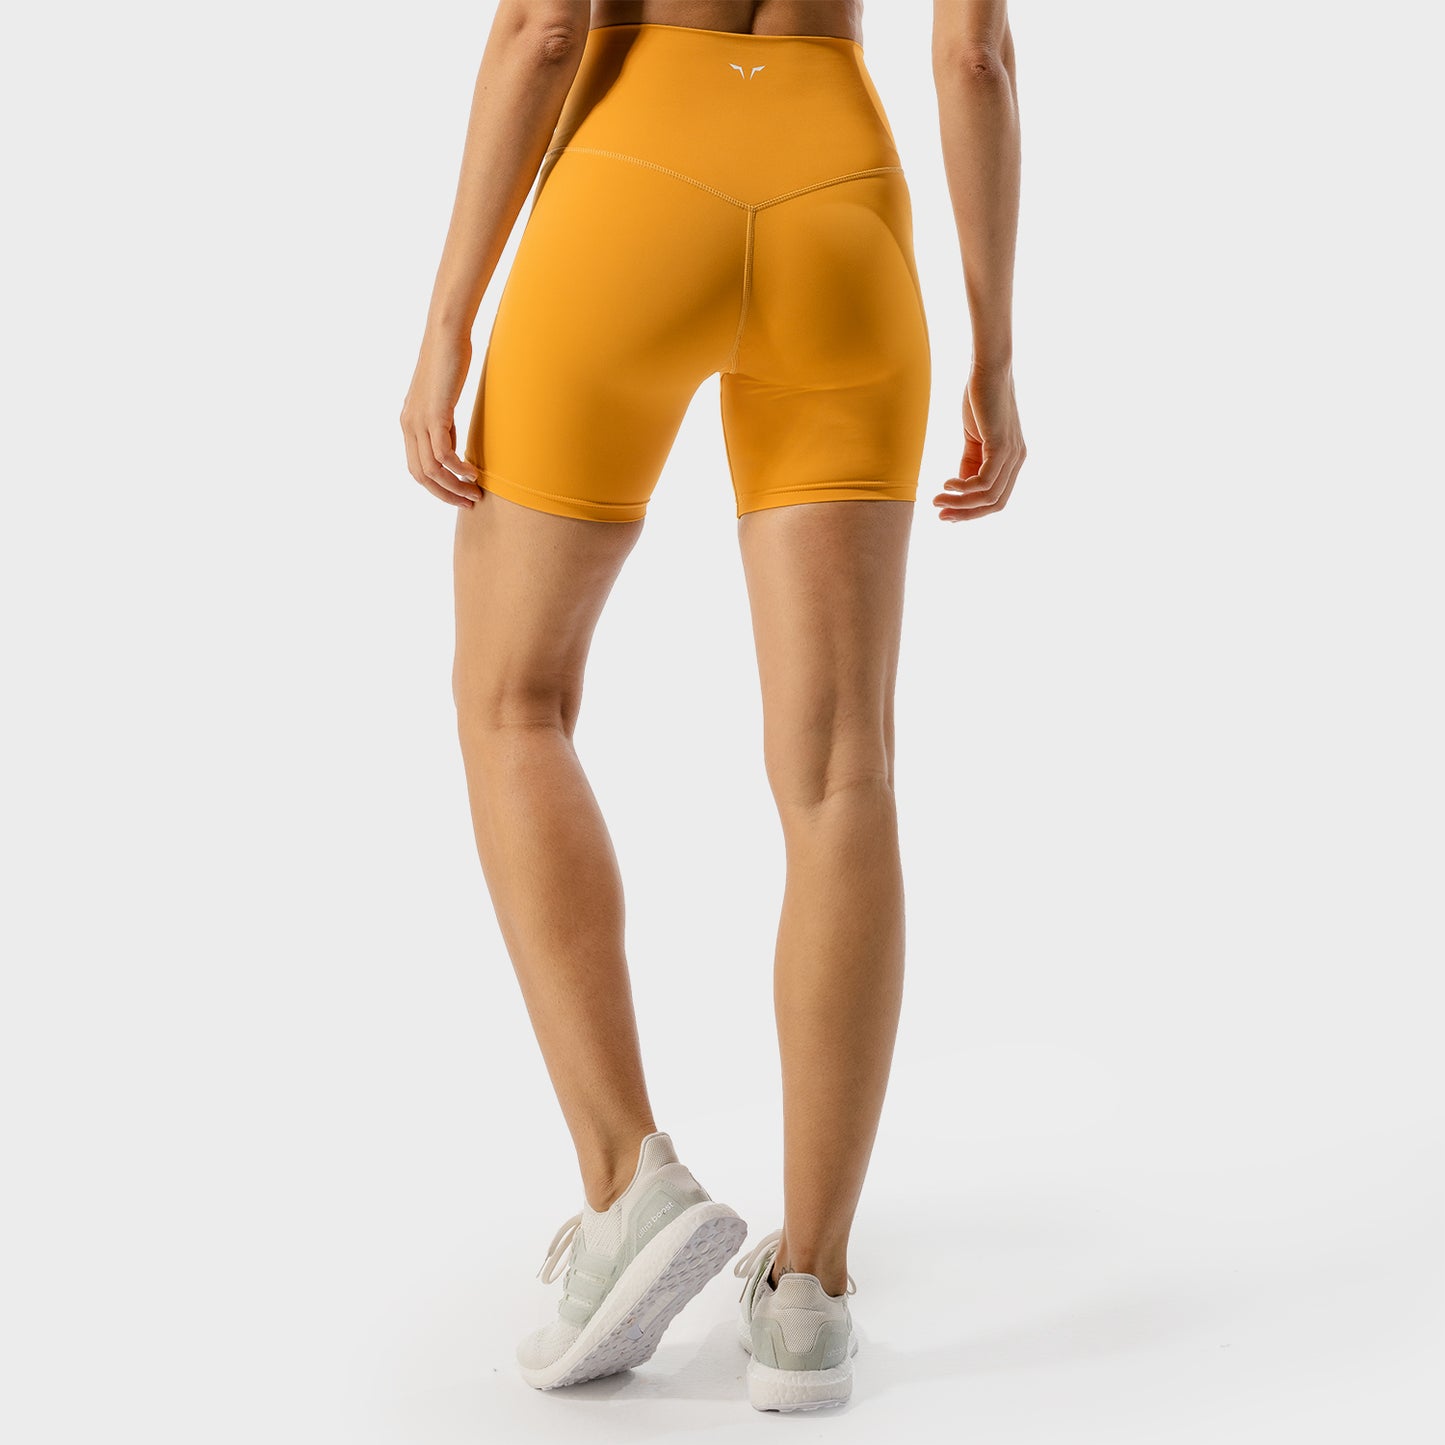 squatwolf-workout-clothes-core-agile-shorts-yellow-gym-shorts-for-women